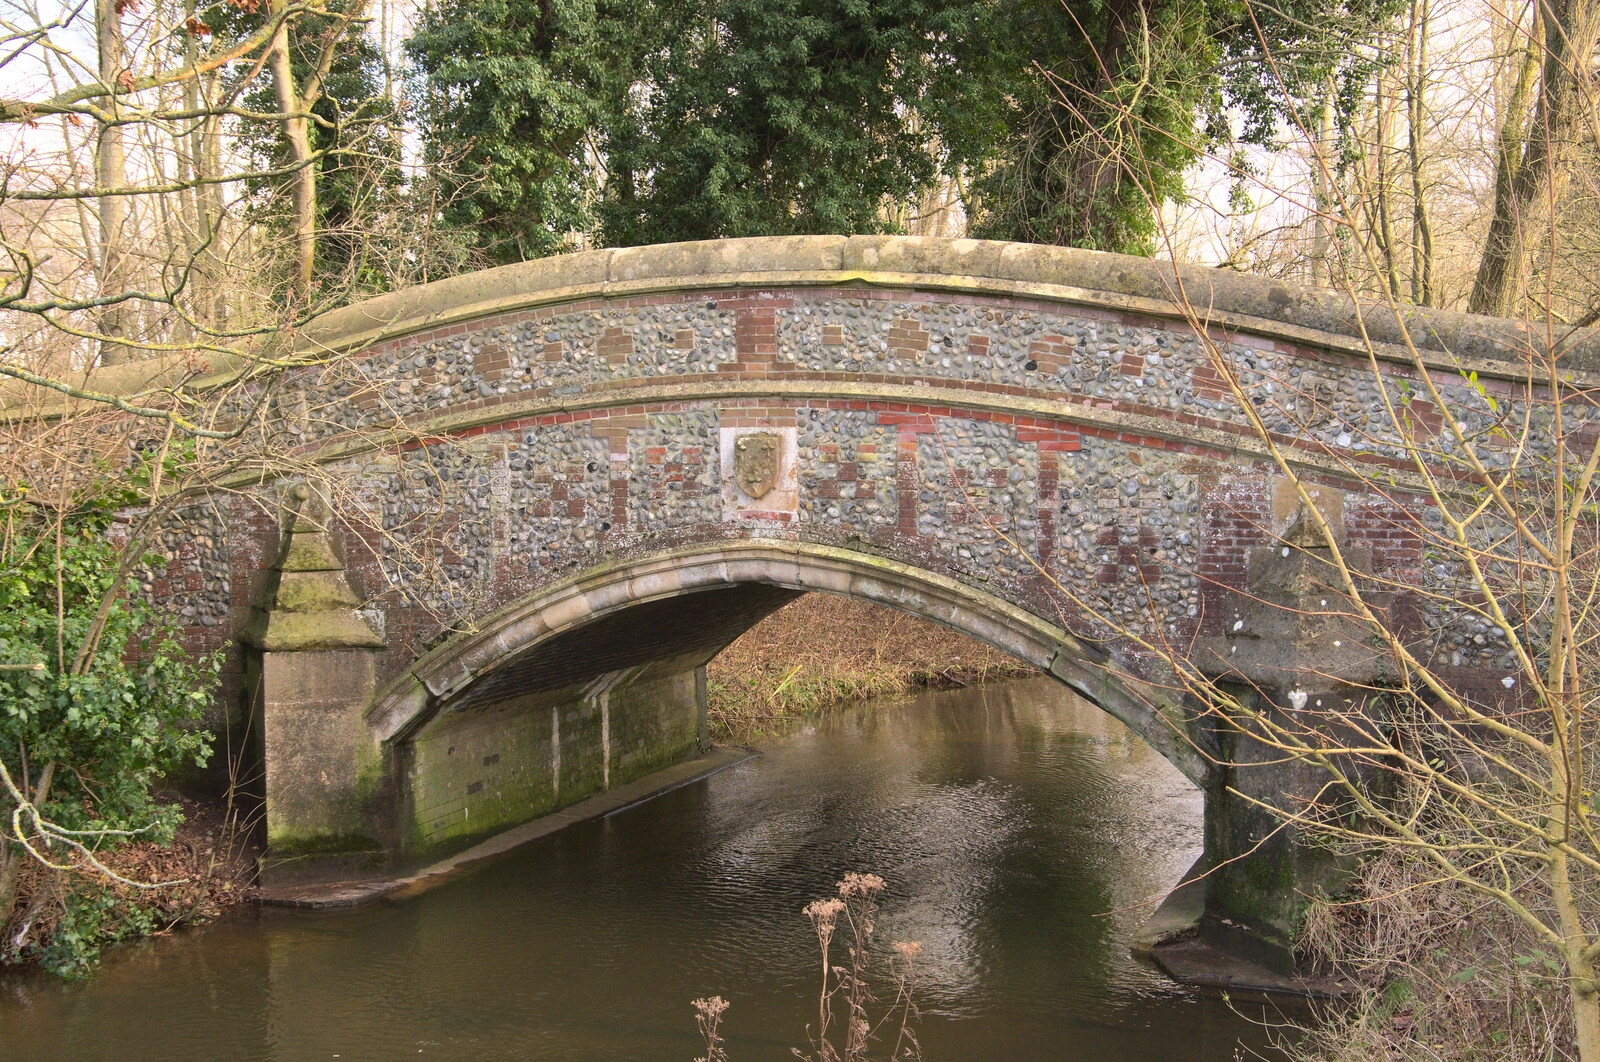 A nice old bridge over the river from A Walk Around Knettishall Heath, Thetford, Norfolk - 2nd January 2022